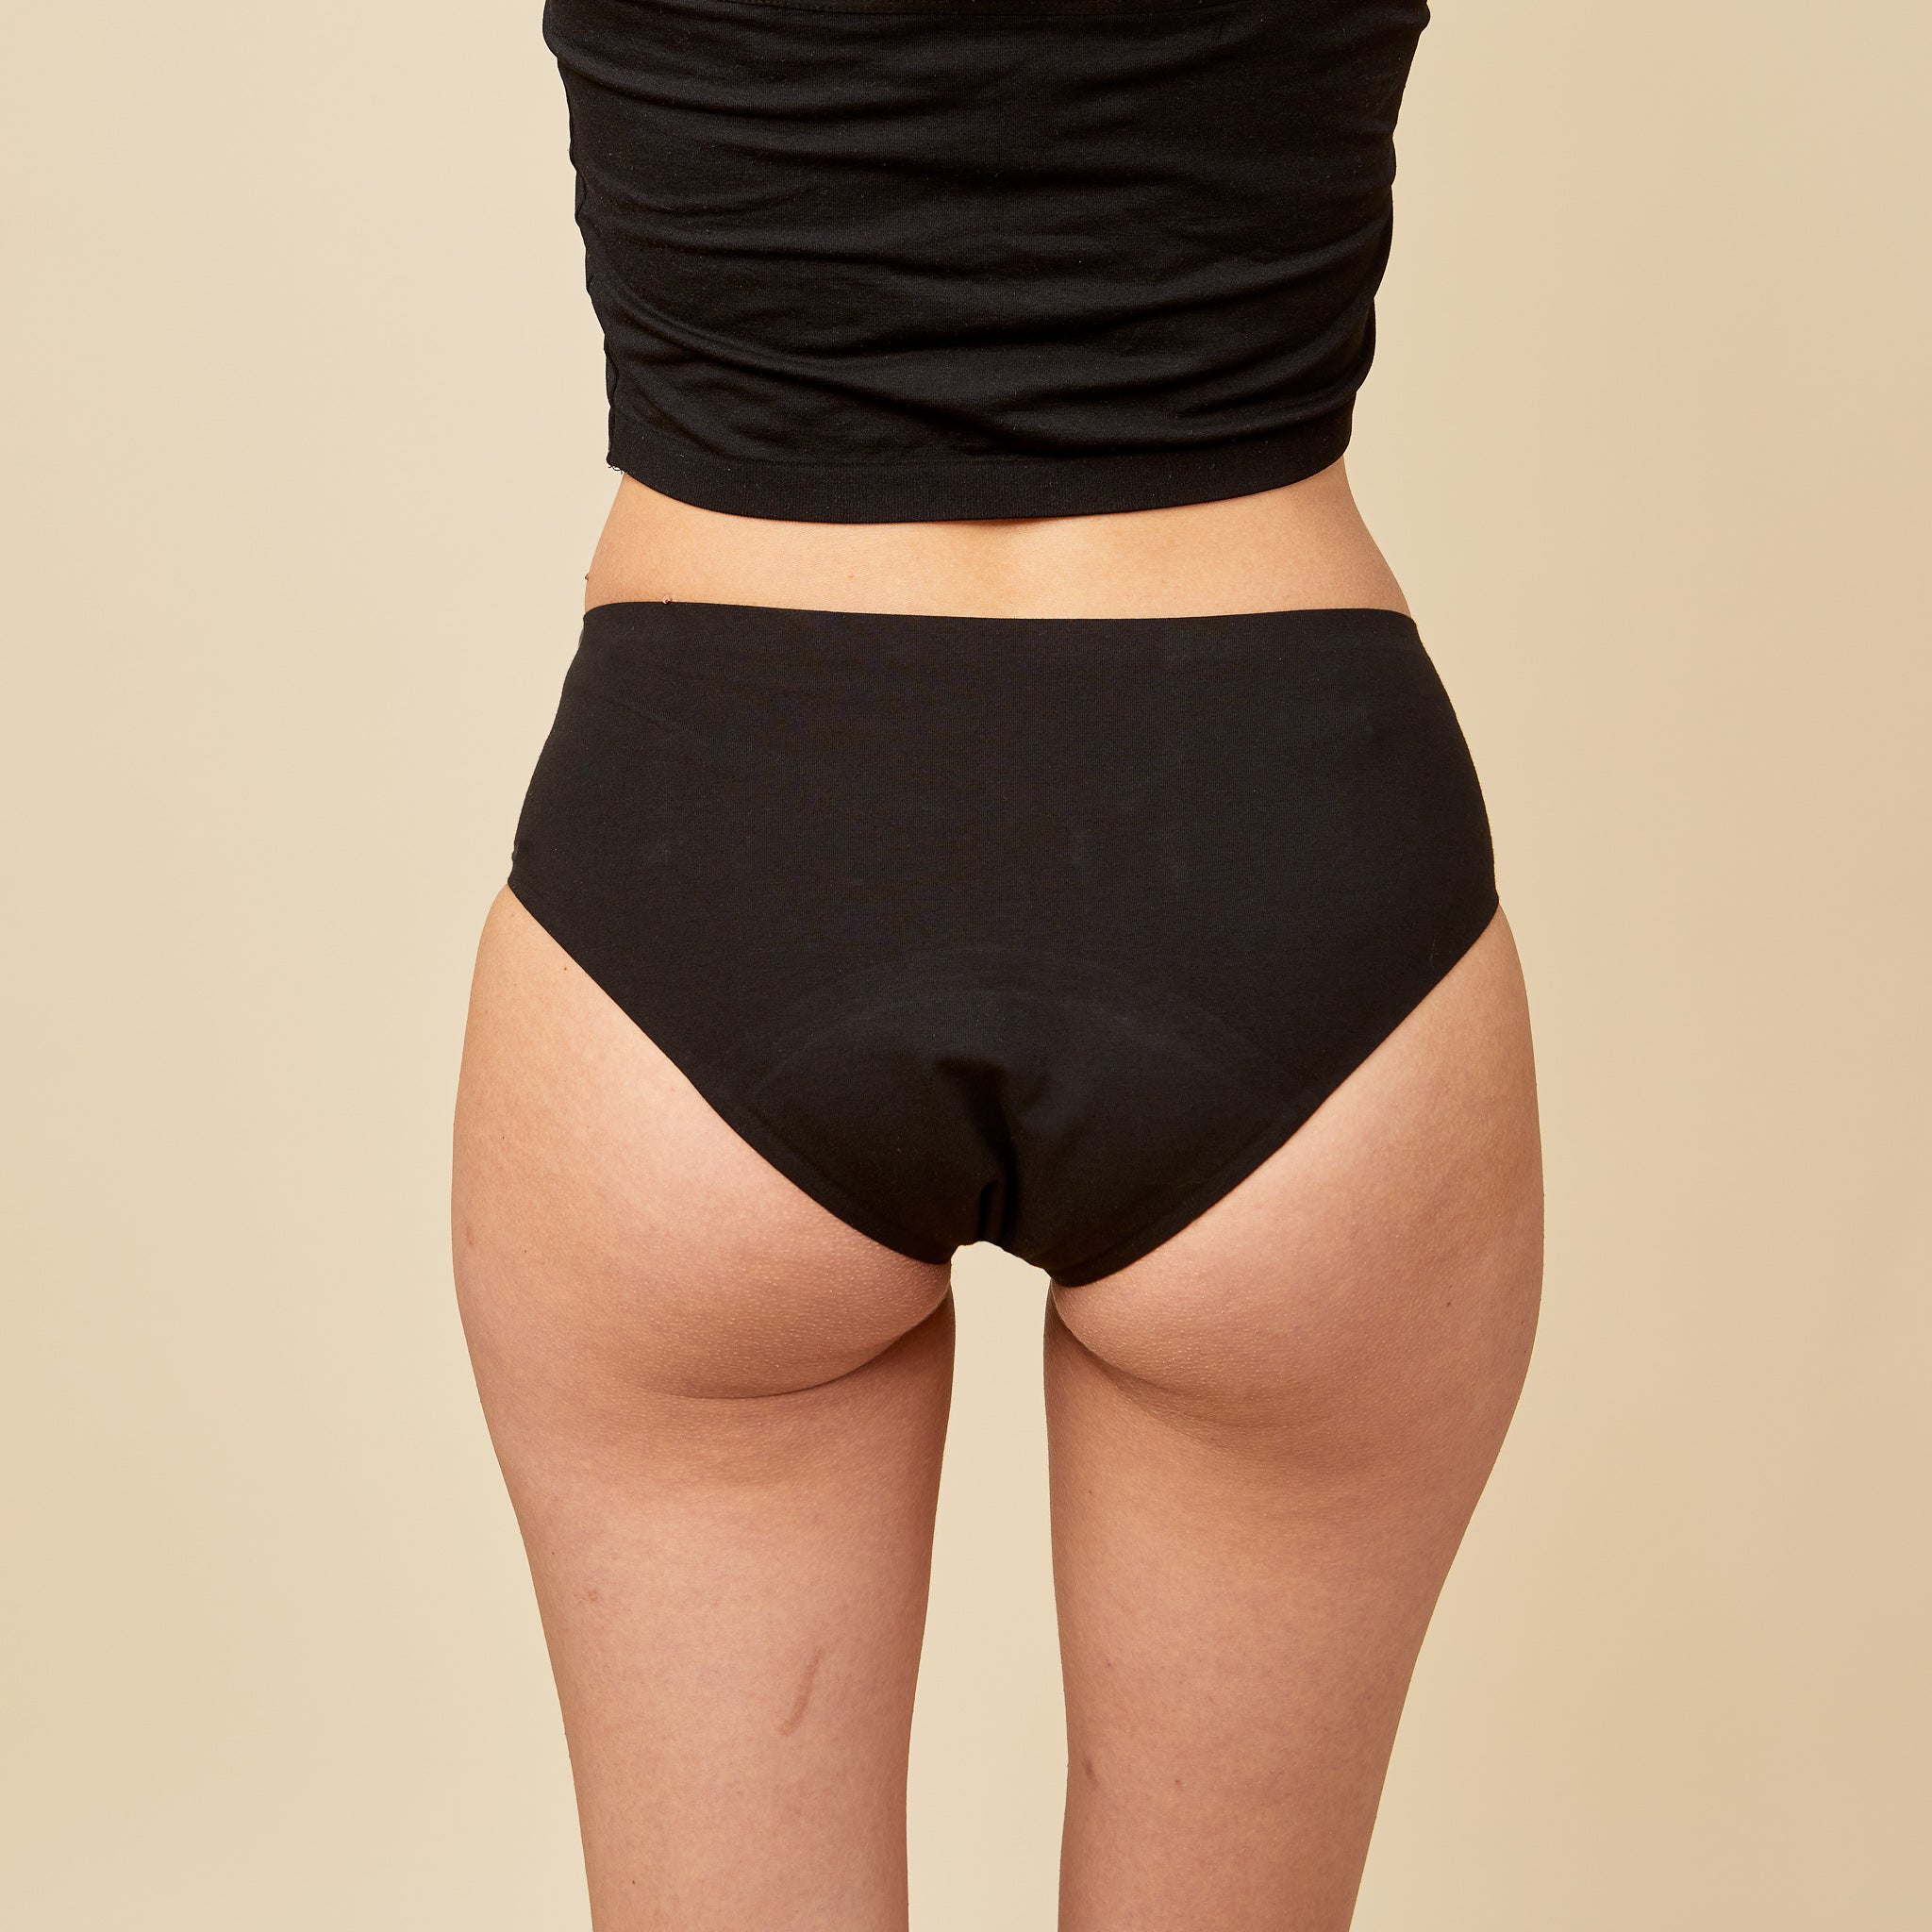  dais period underwear, black, seamless, leak proof, shaping, organic cottondais period underwear hipster in black made of organic cotton worn by a model shown from the back. Super absorbency of up to 4 tampons of blood.